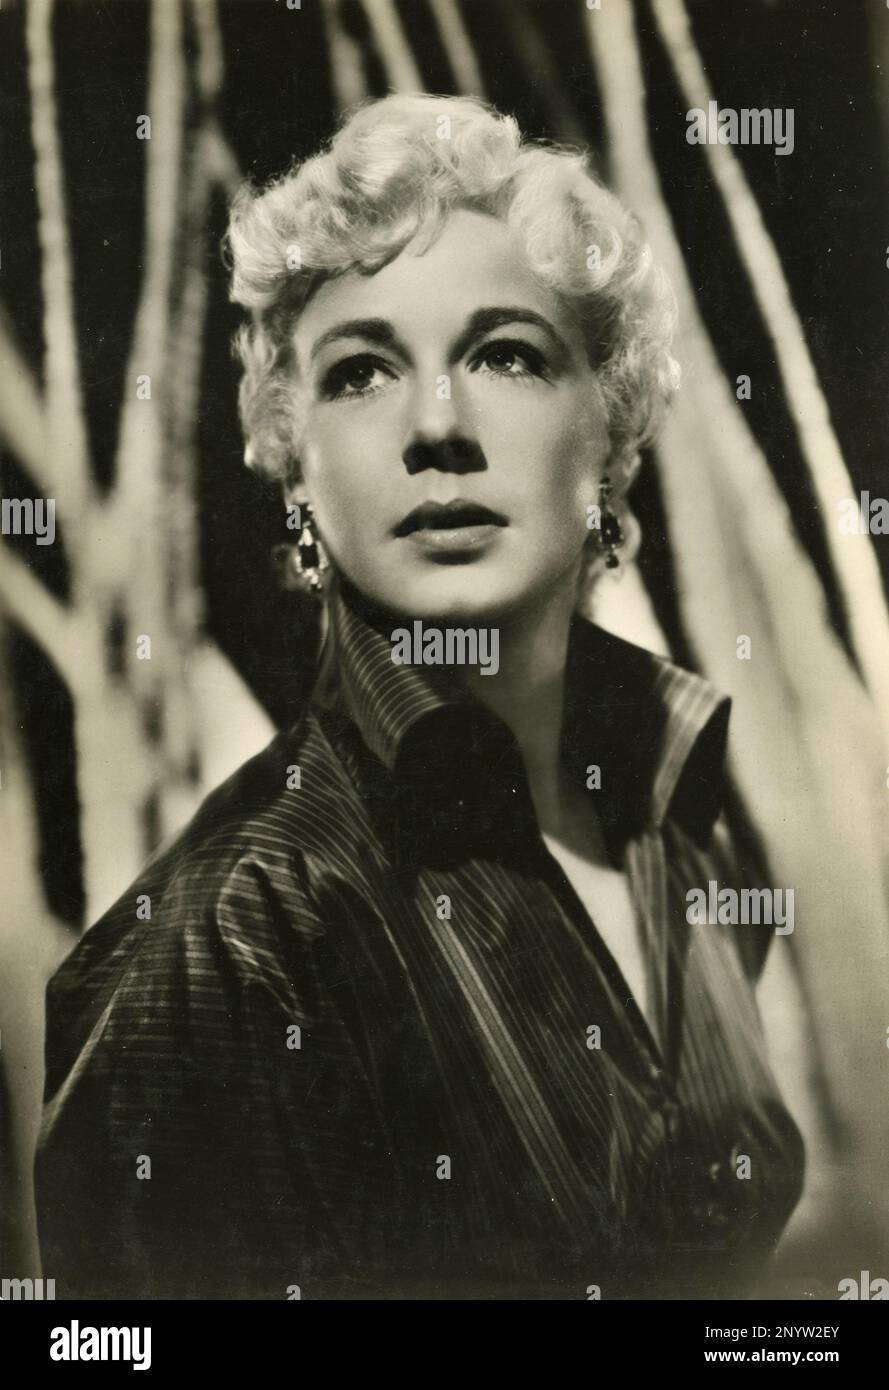 American actress Betty Hutton in the movie The Greatest Show on Earth, USA 1952 Stock Photo